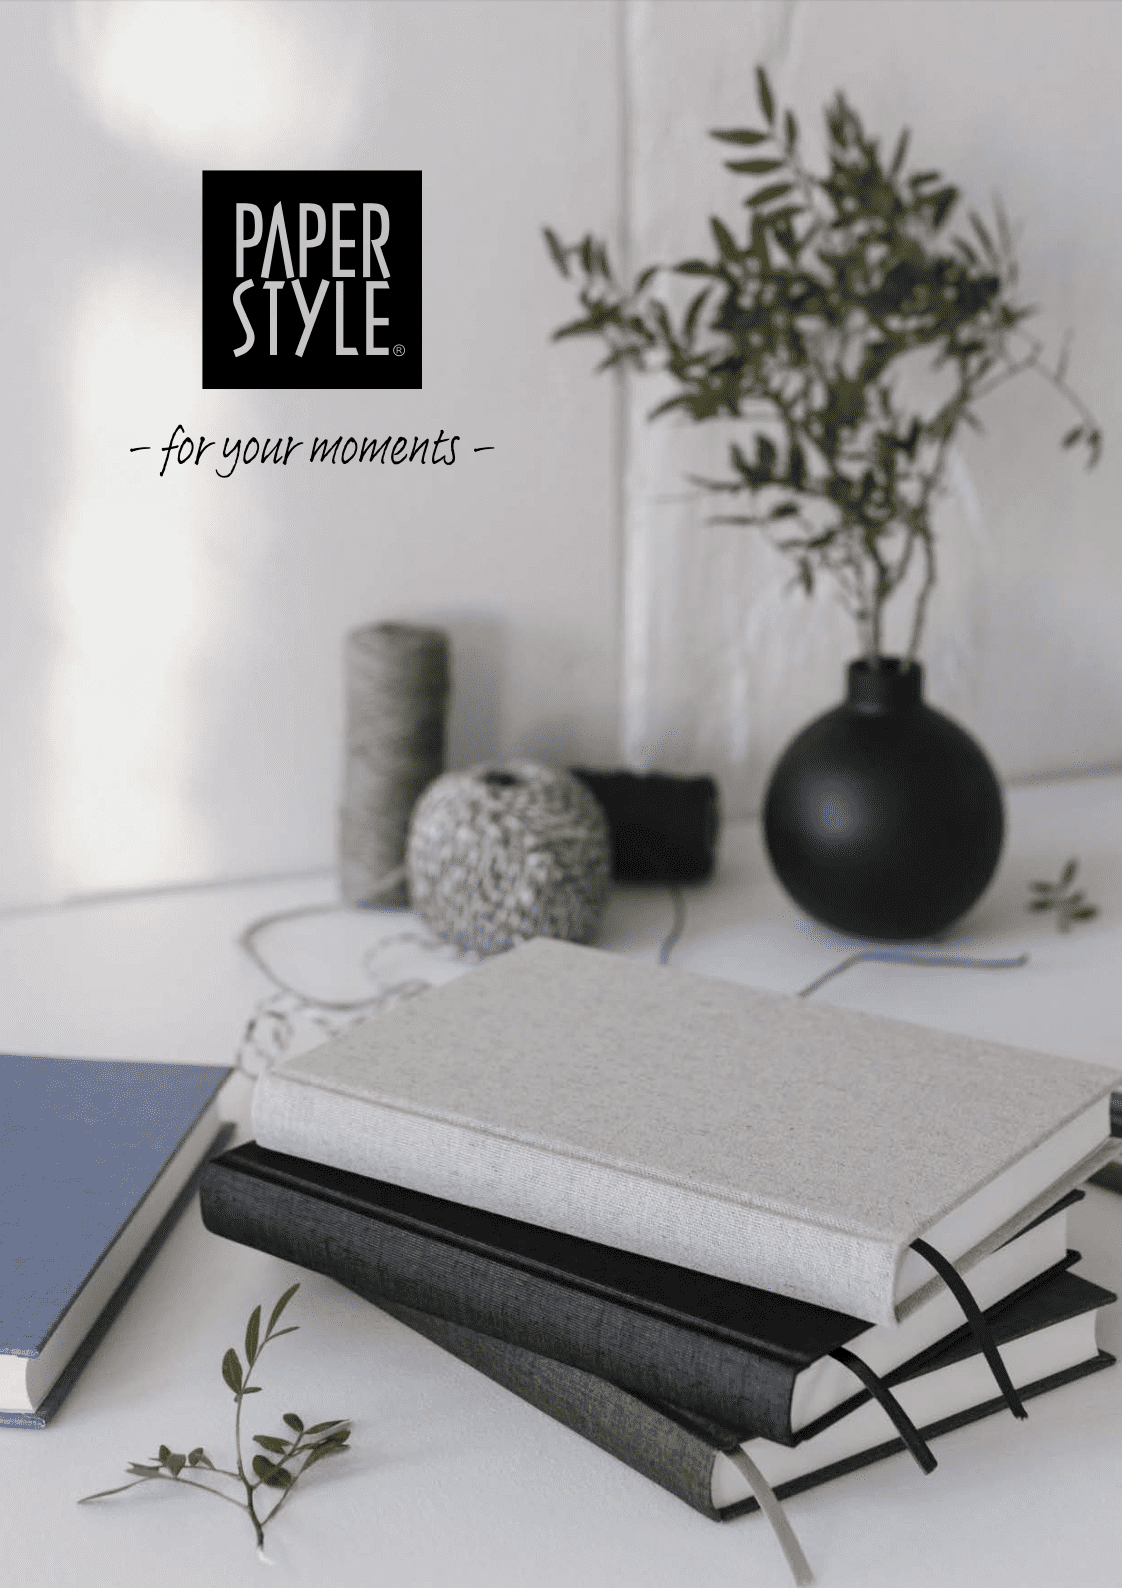 Paperstyle, for your moments, katalog